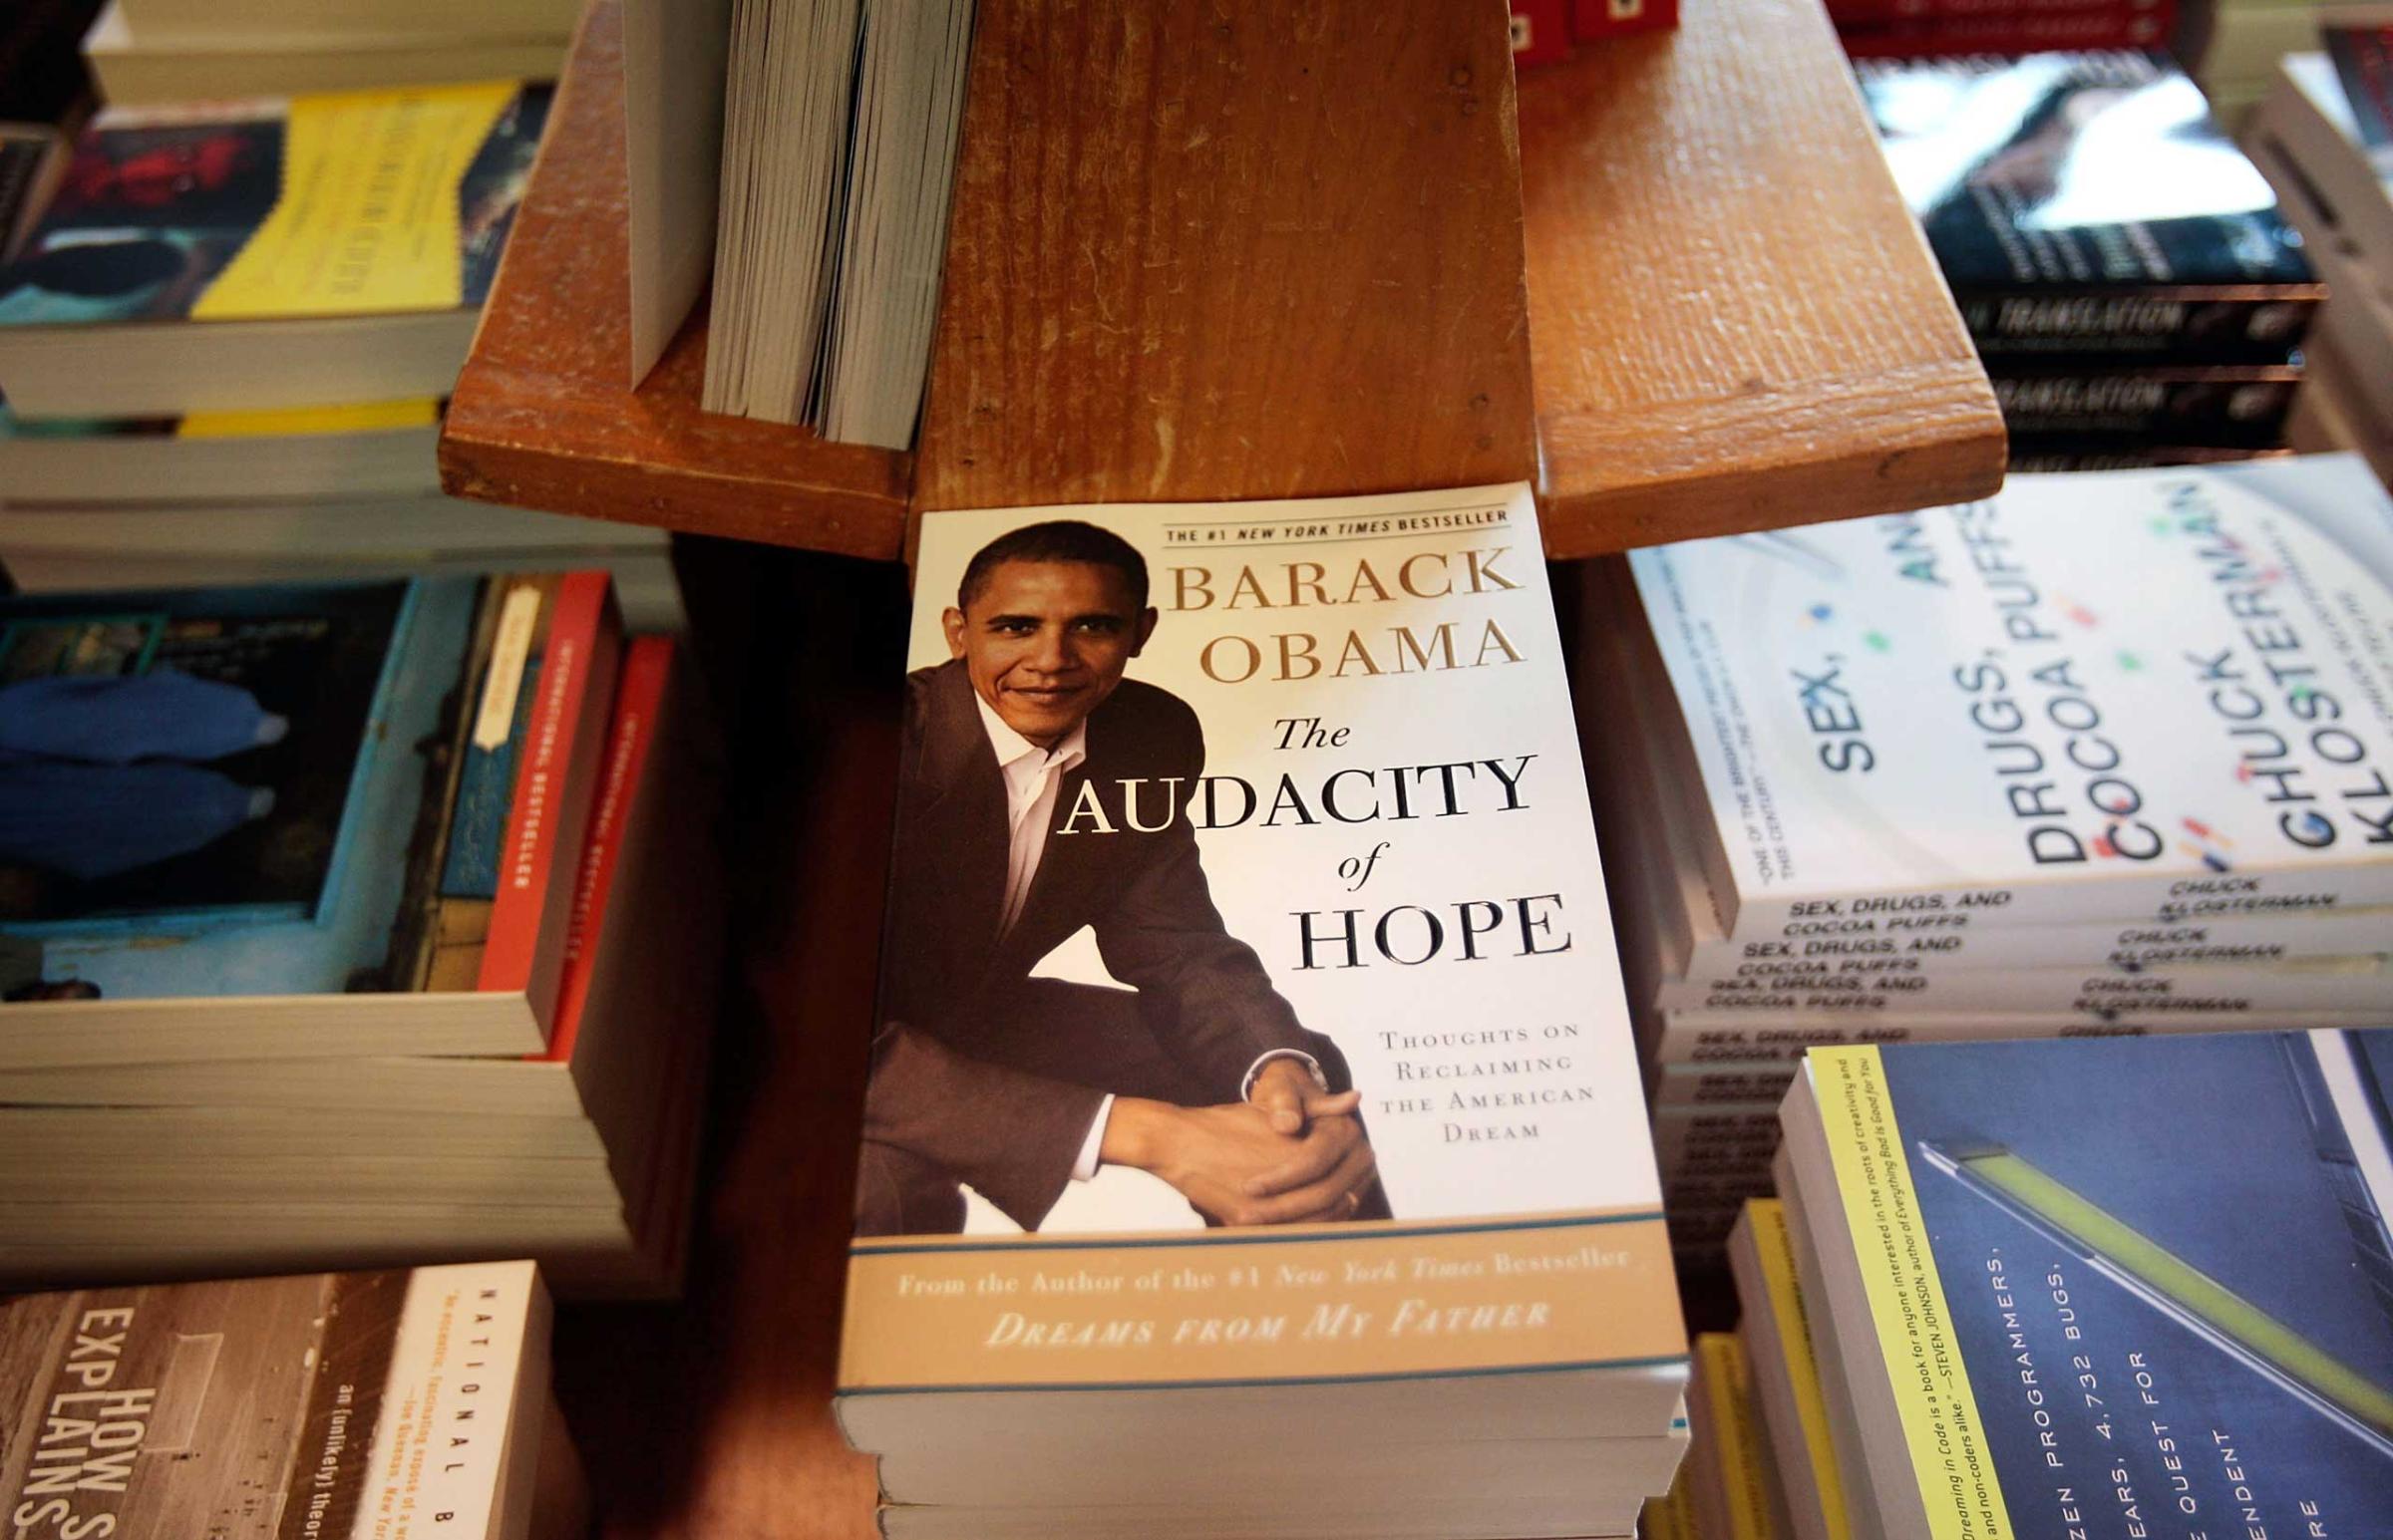 Democratic presidential candidate Sen. Barack Obama's book "The Audacity of Hope" is displayed at a bookstore in New York City on July 14, 2008.